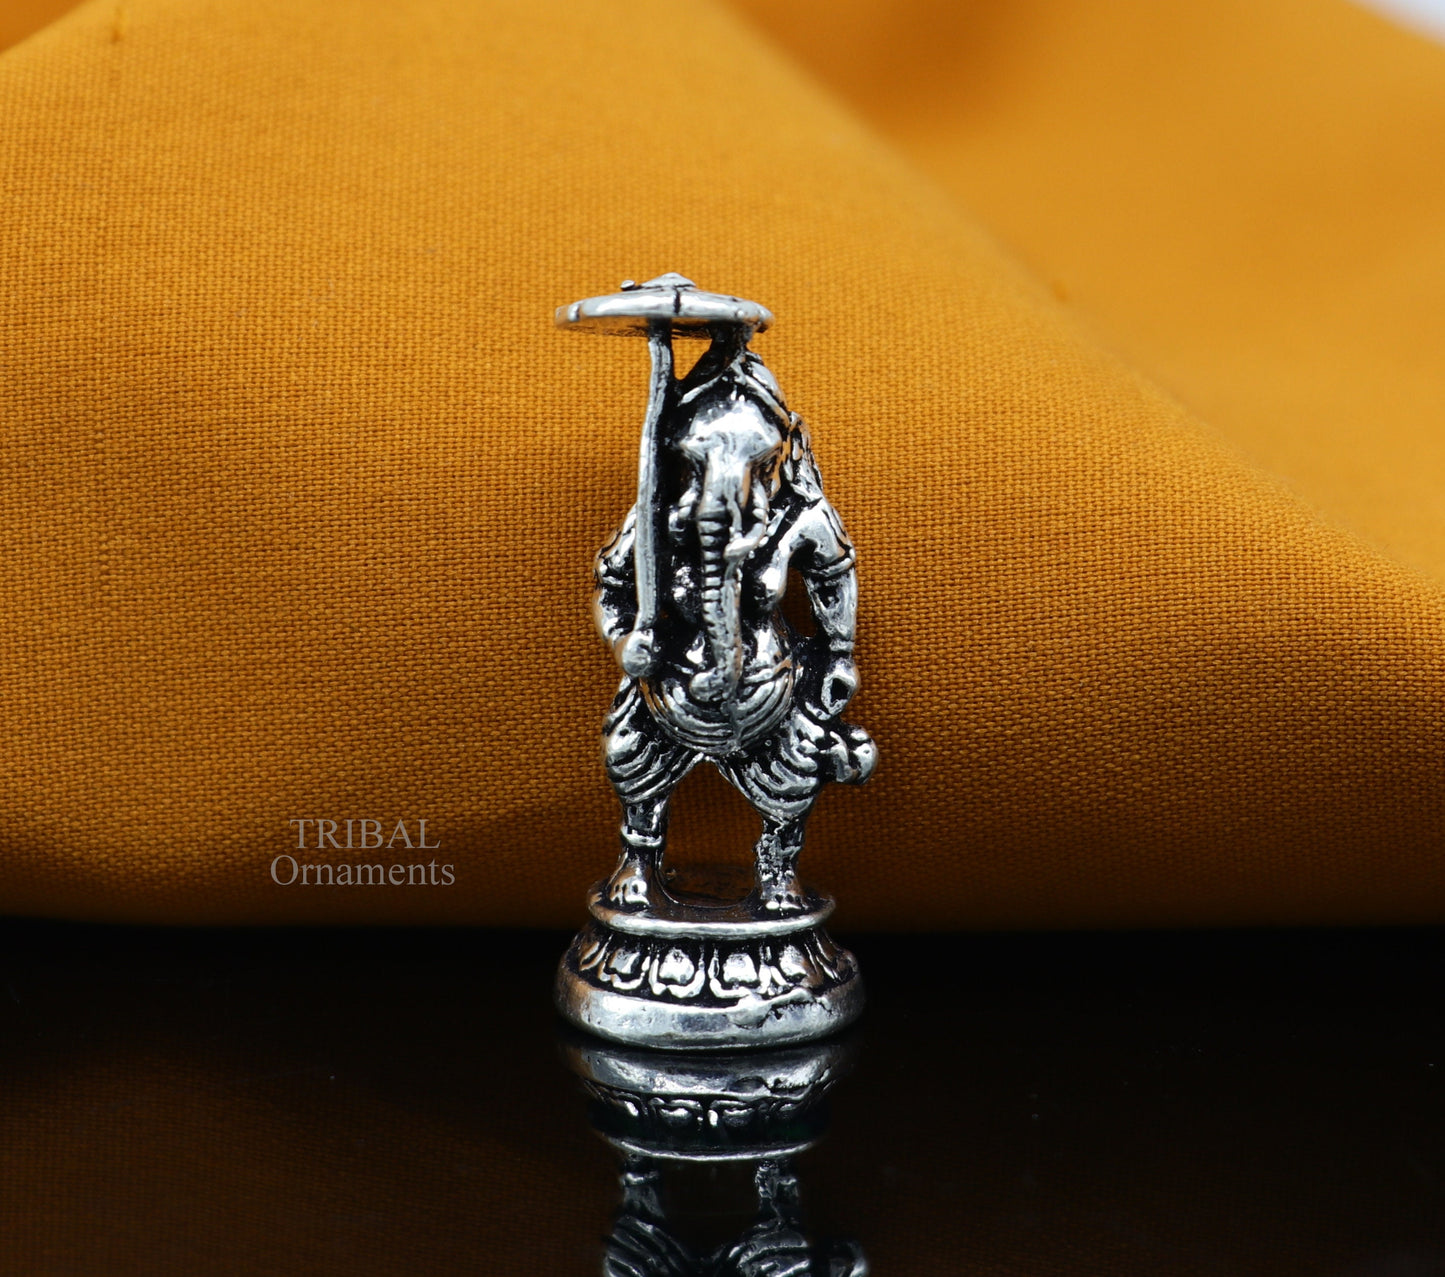 925 Sterling silver Divine lord Ganesha standing statue art, best puja figurine for home temple for wealth and prosperity gift art art526 - TRIBAL ORNAMENTS